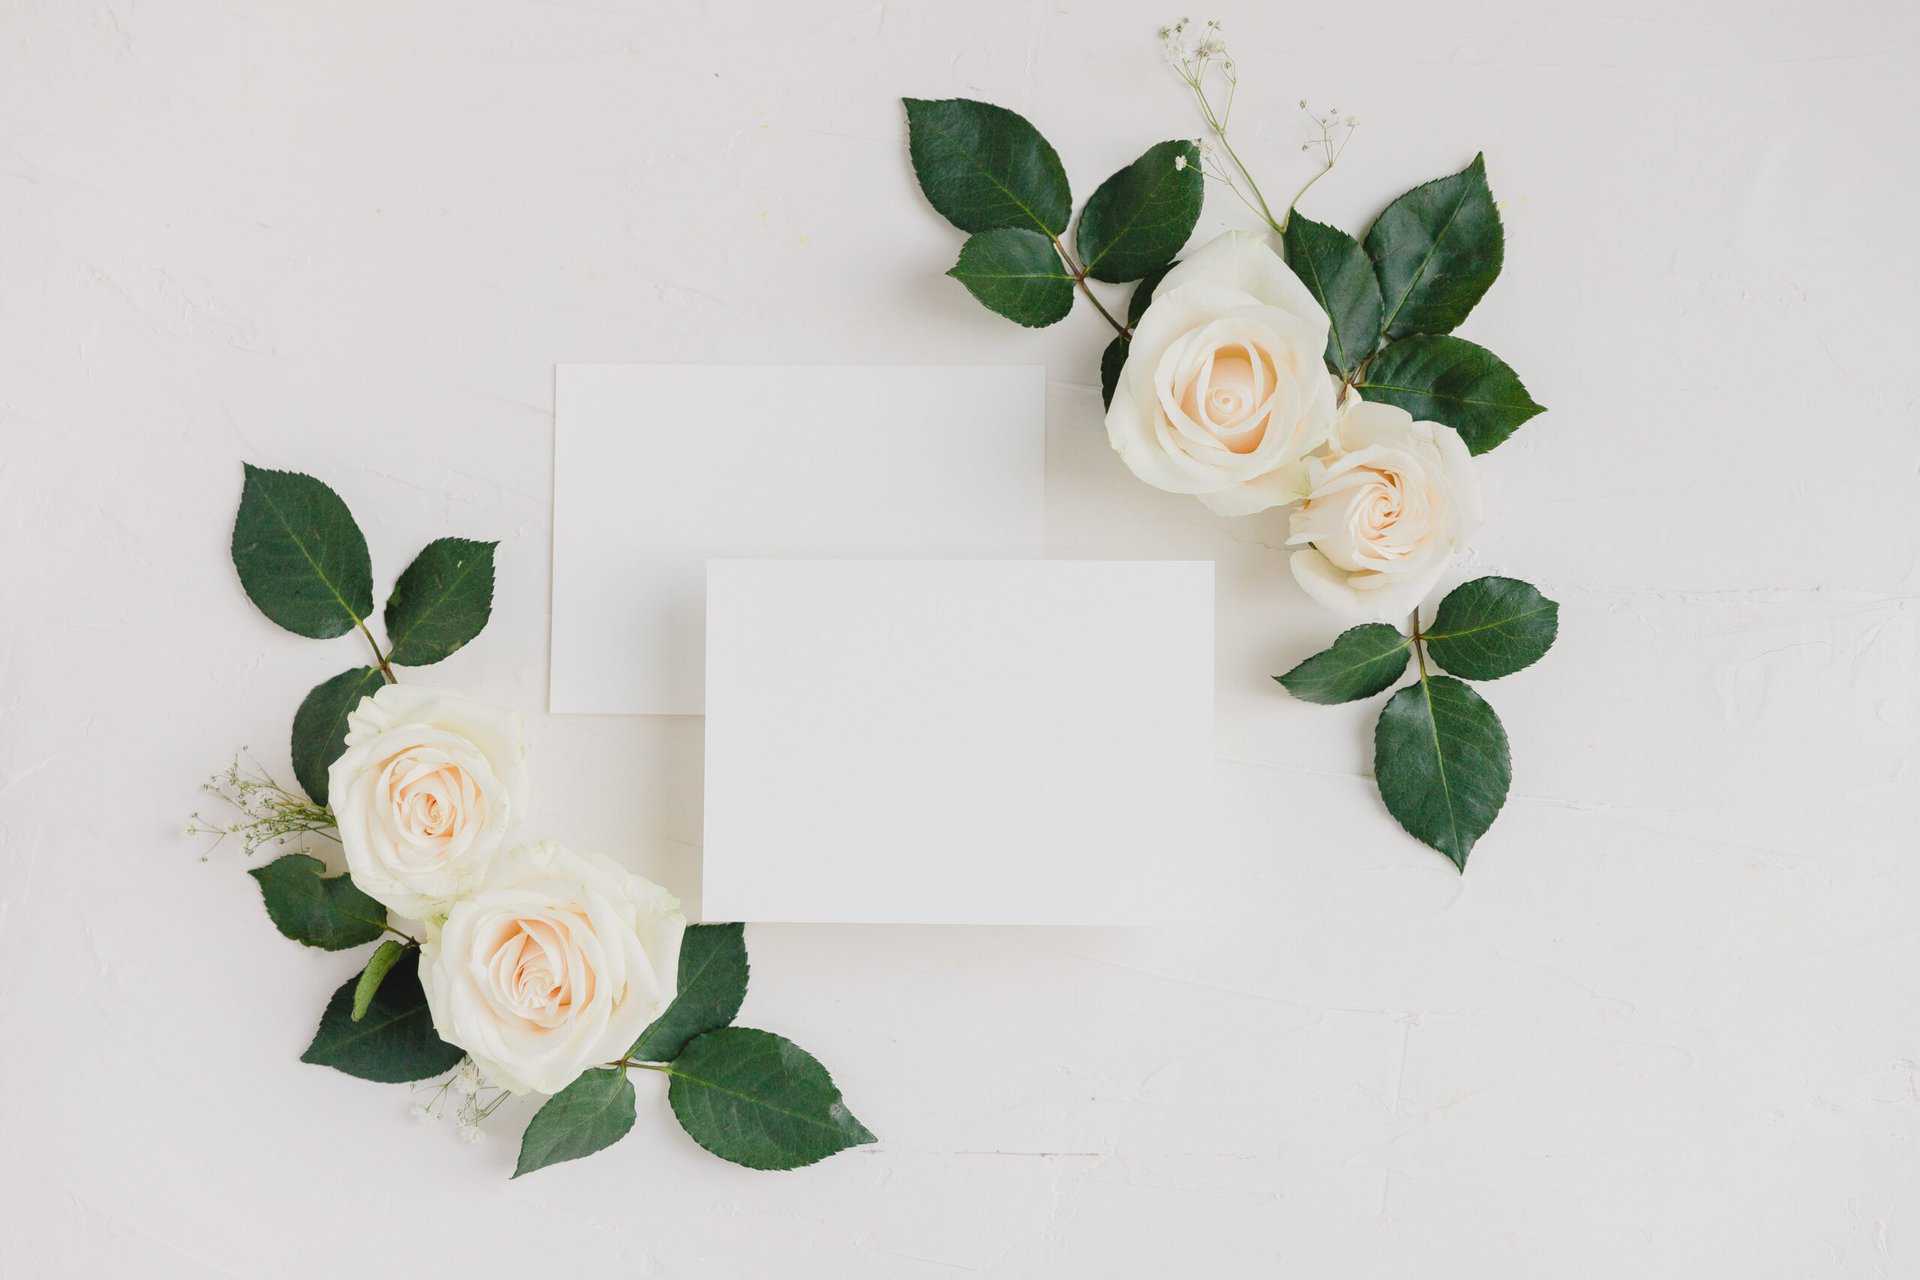 Choosing the Perfect Words: What to Write on a Funeral Flower Card